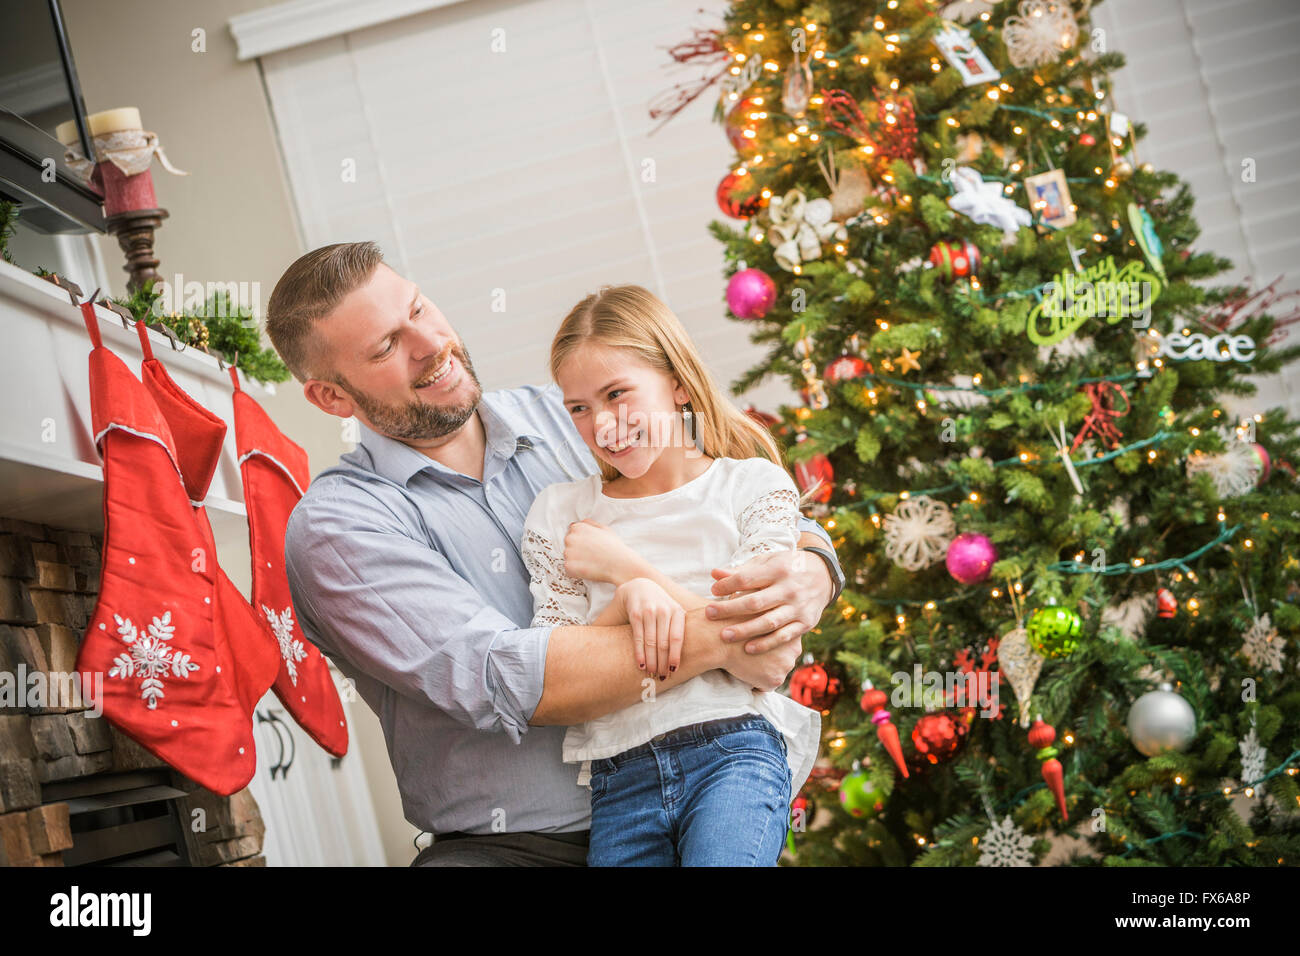 Caucasian father and daughter hugging near Christmas tree Stock Photo